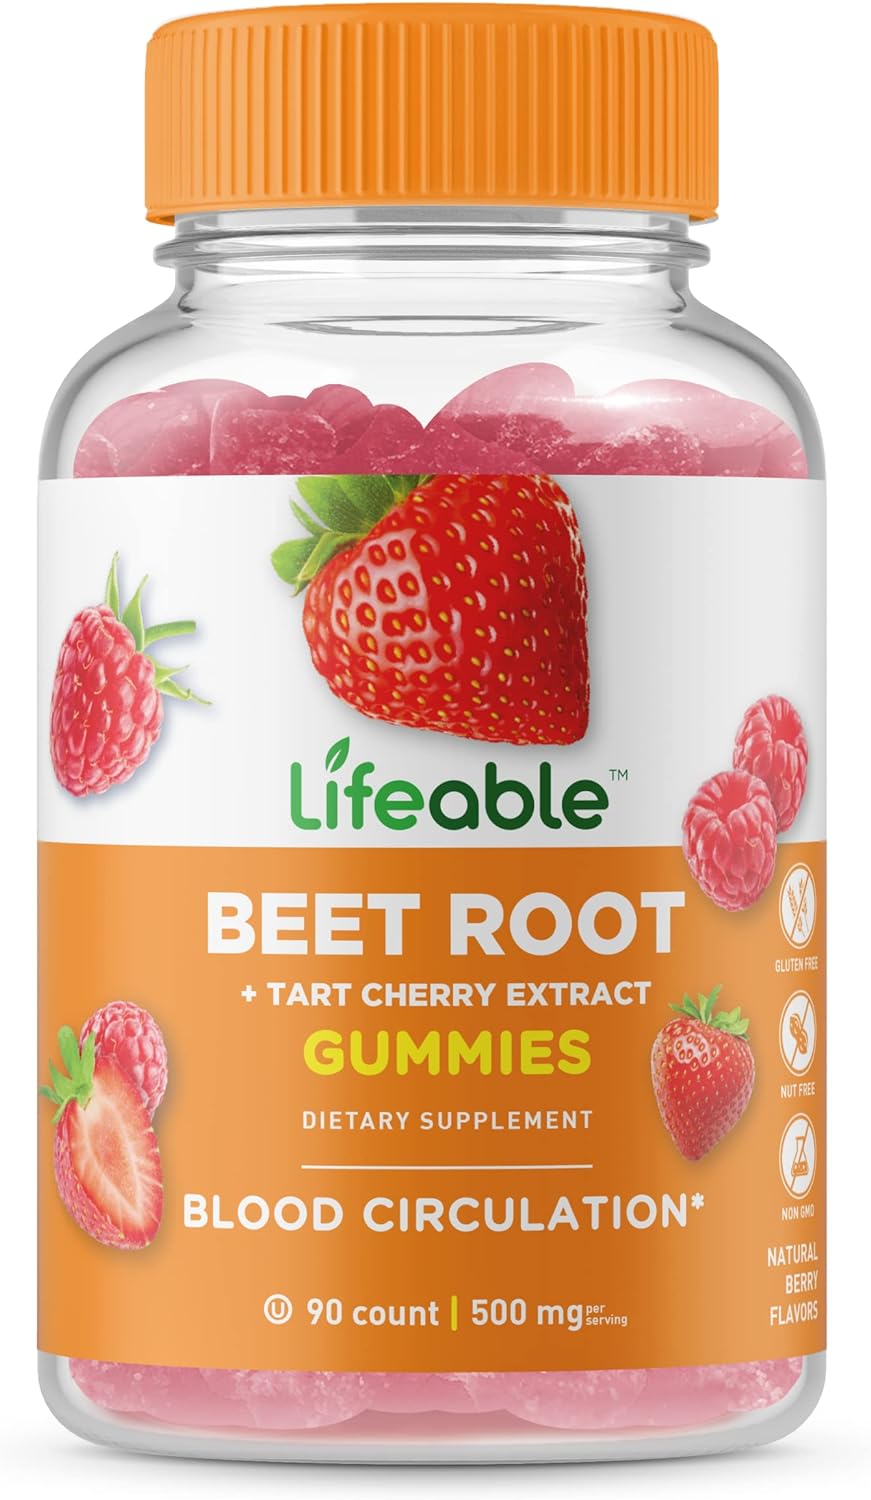 Lifeable Beet Root Vitamin - 500mg - Great Tasting Natural Flavor BeetRoot Powder Gummy Supplement - Gluten Free, Vegetarian, GMO-Free - For Adults, Men, and Women - 90 Gummies